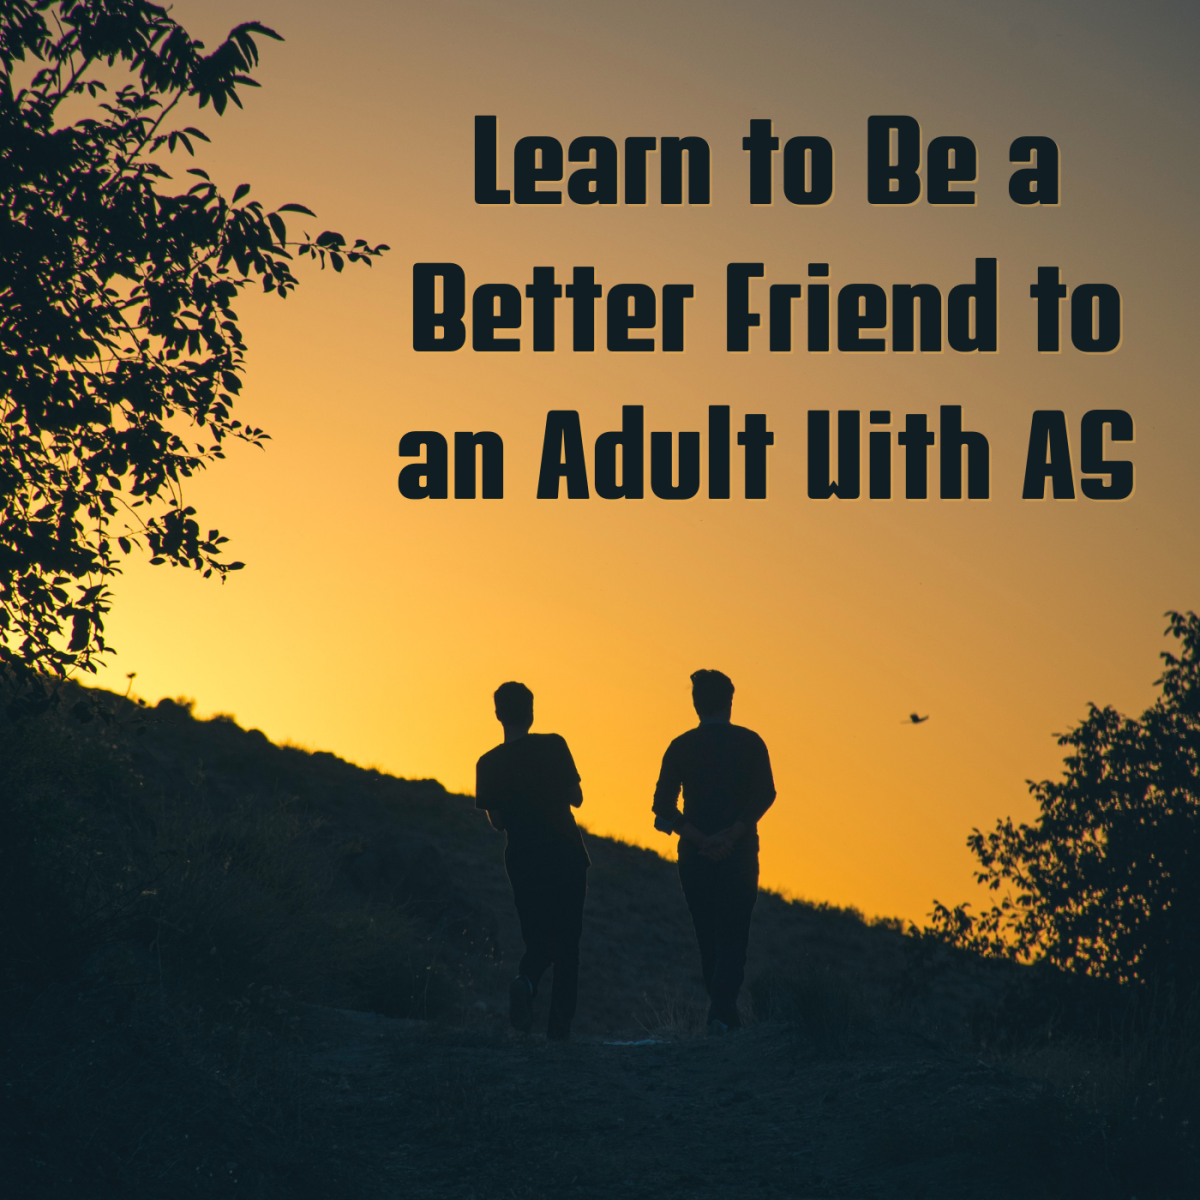 Your friend with Aspergers Syndrome has to constantly accommodate you in conversations. Learn how you can alleviate some of their burden and accommodate them as well.